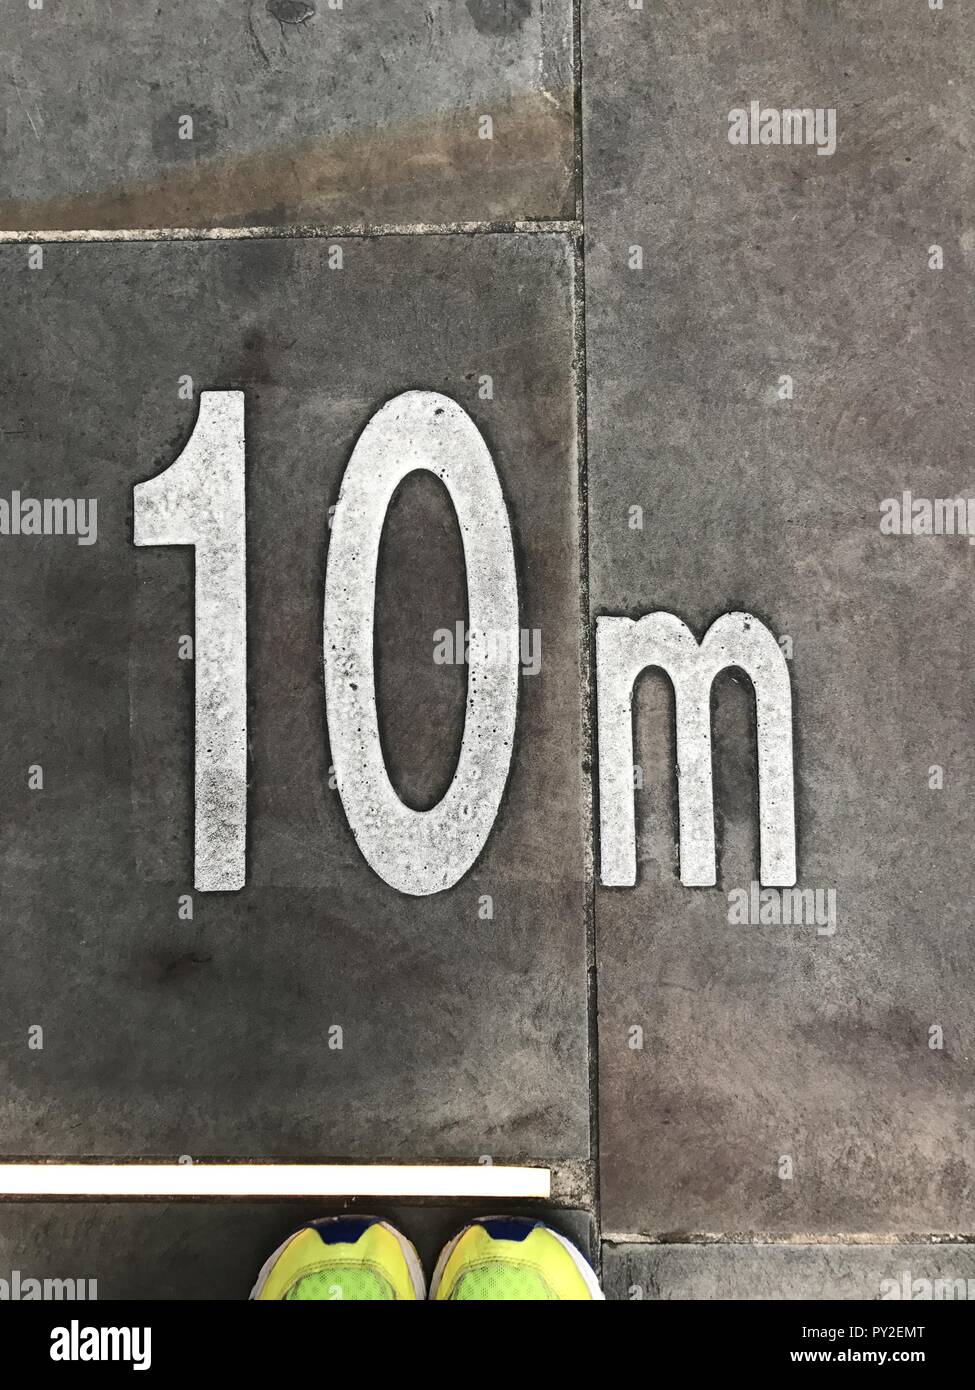 Human feet standing by a 10m marking on the pavement Stock Photo - Alamy